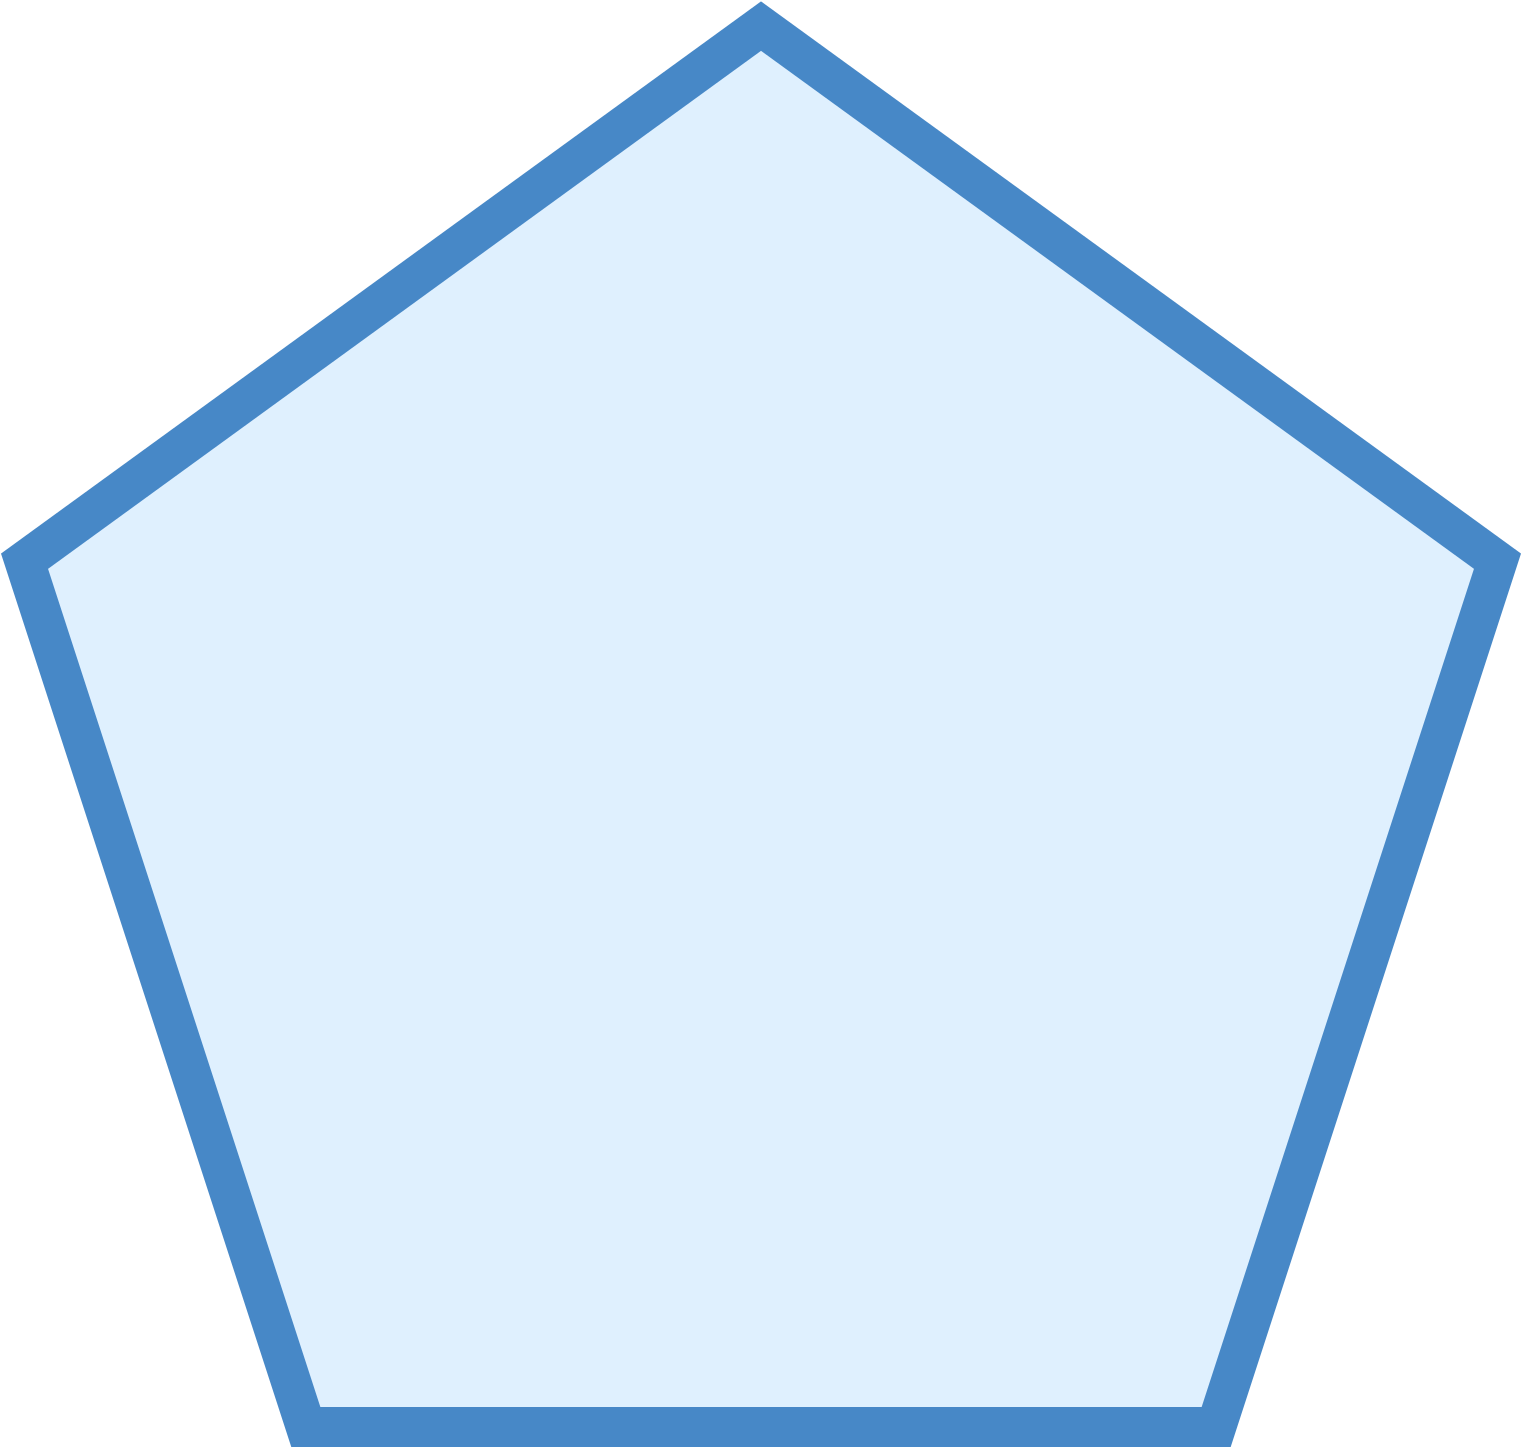 A Blue Hexagon With A Black Background